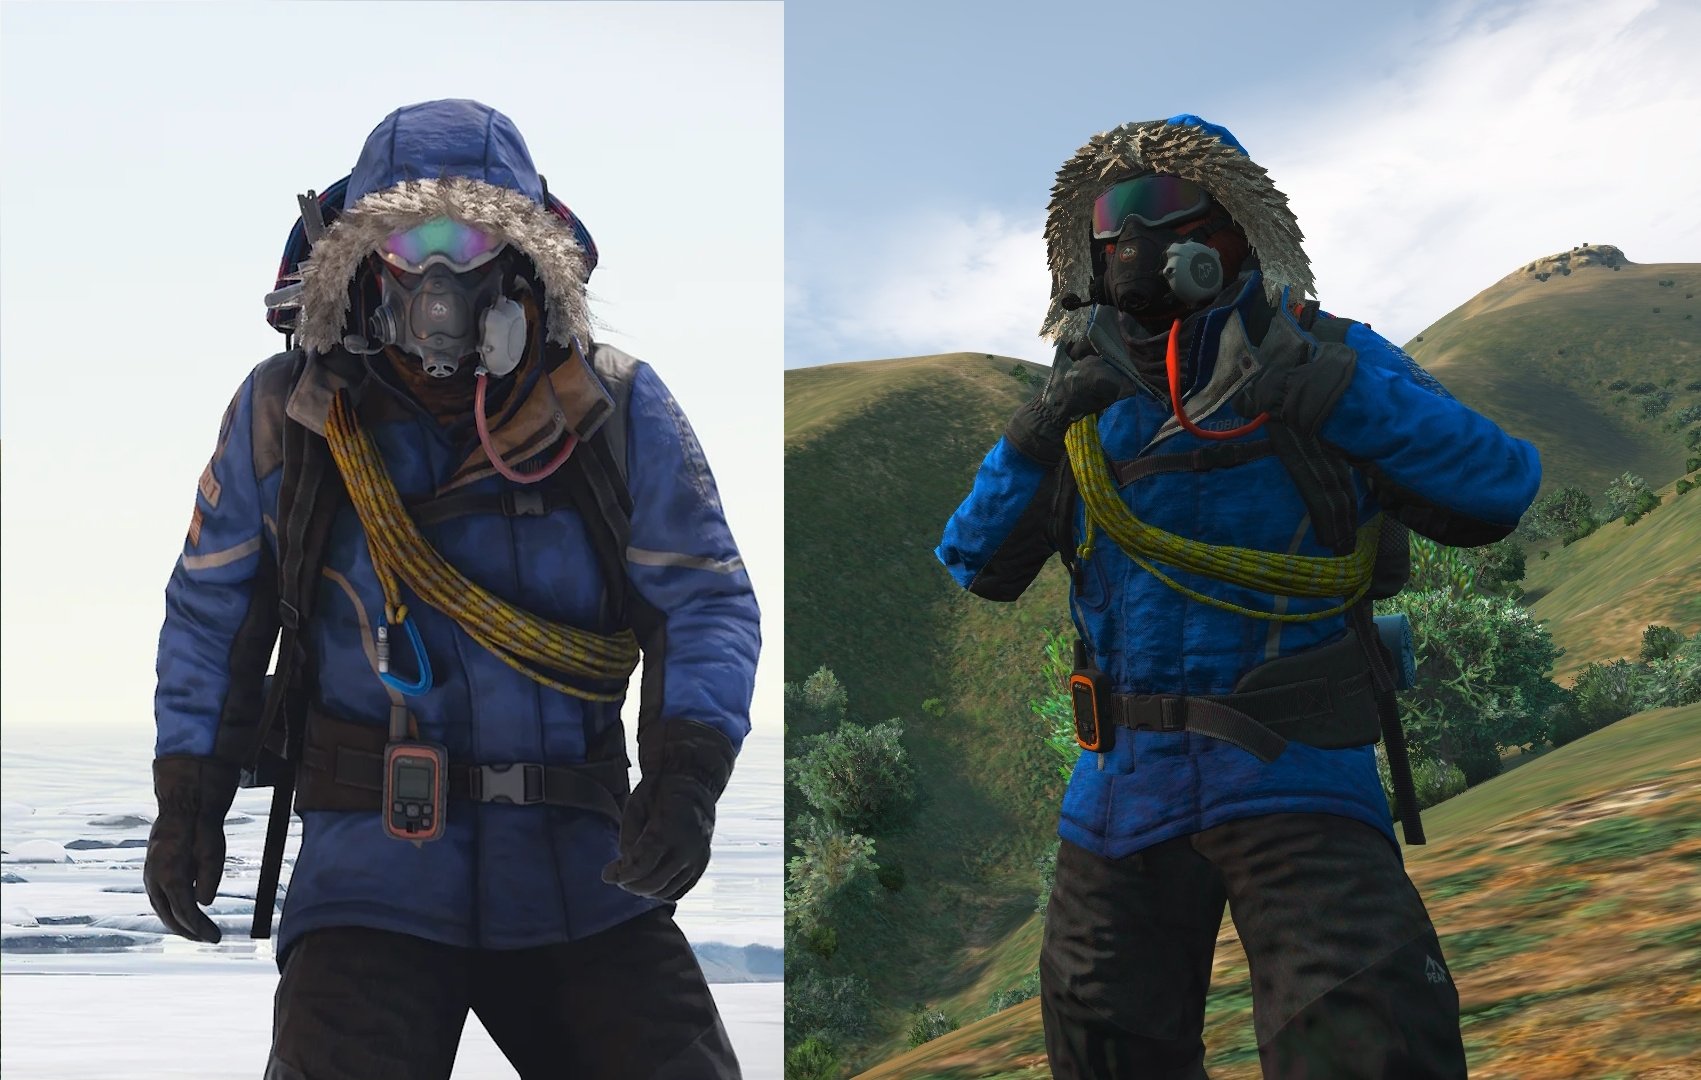 https://img.gta5-mods.com/q95/images/full-body-arctic-suit-from-rust-for-mp-male/8f4afc-Screenshot5.jpg